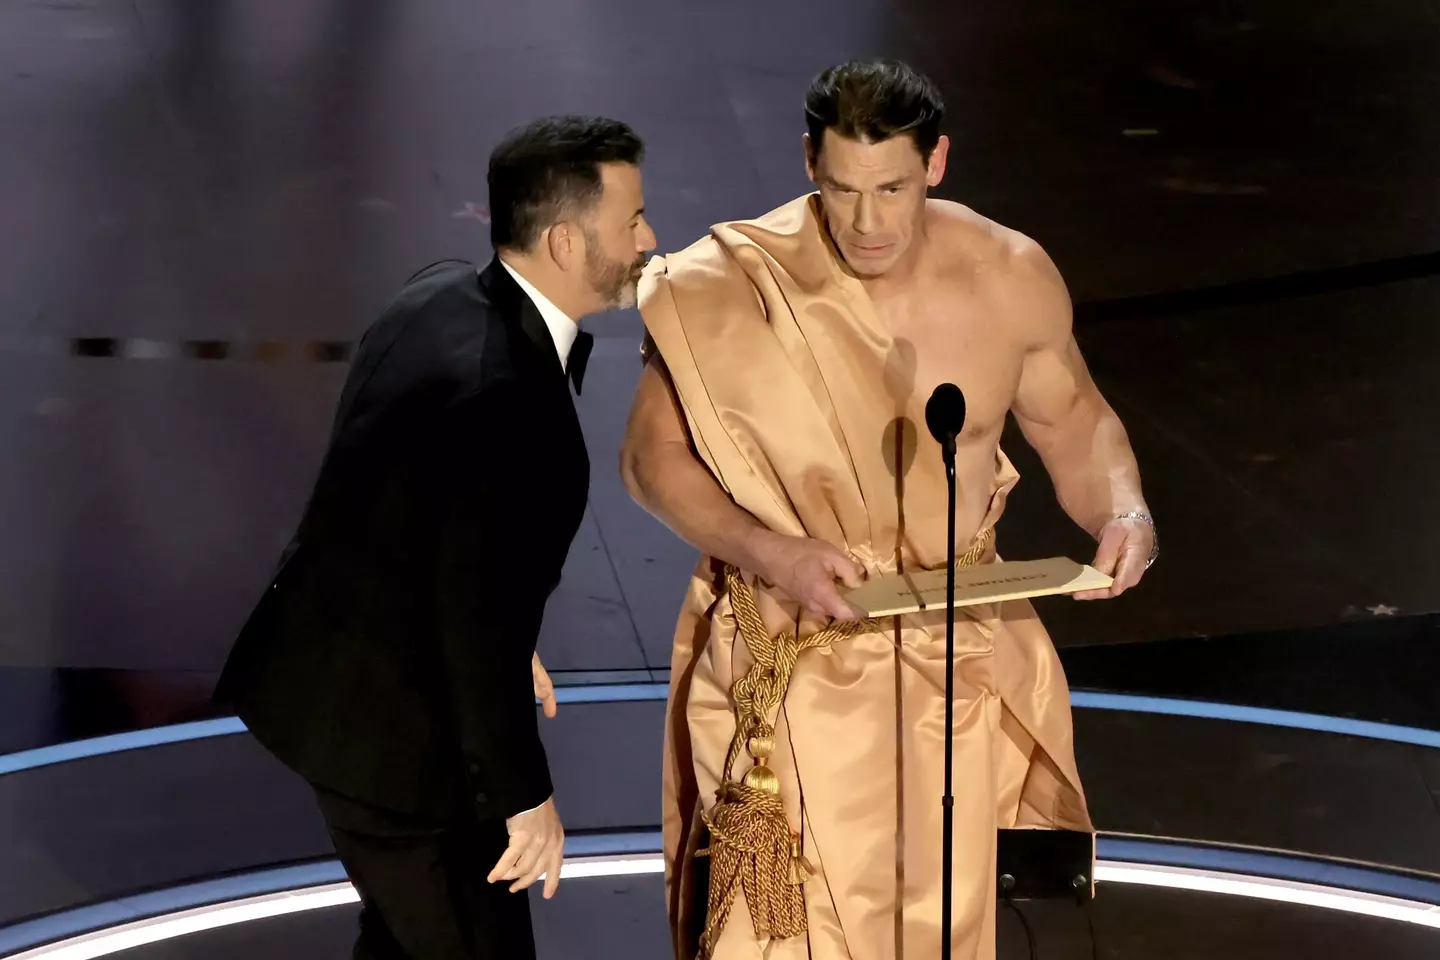 Cena donned a curtain to announce the winner.